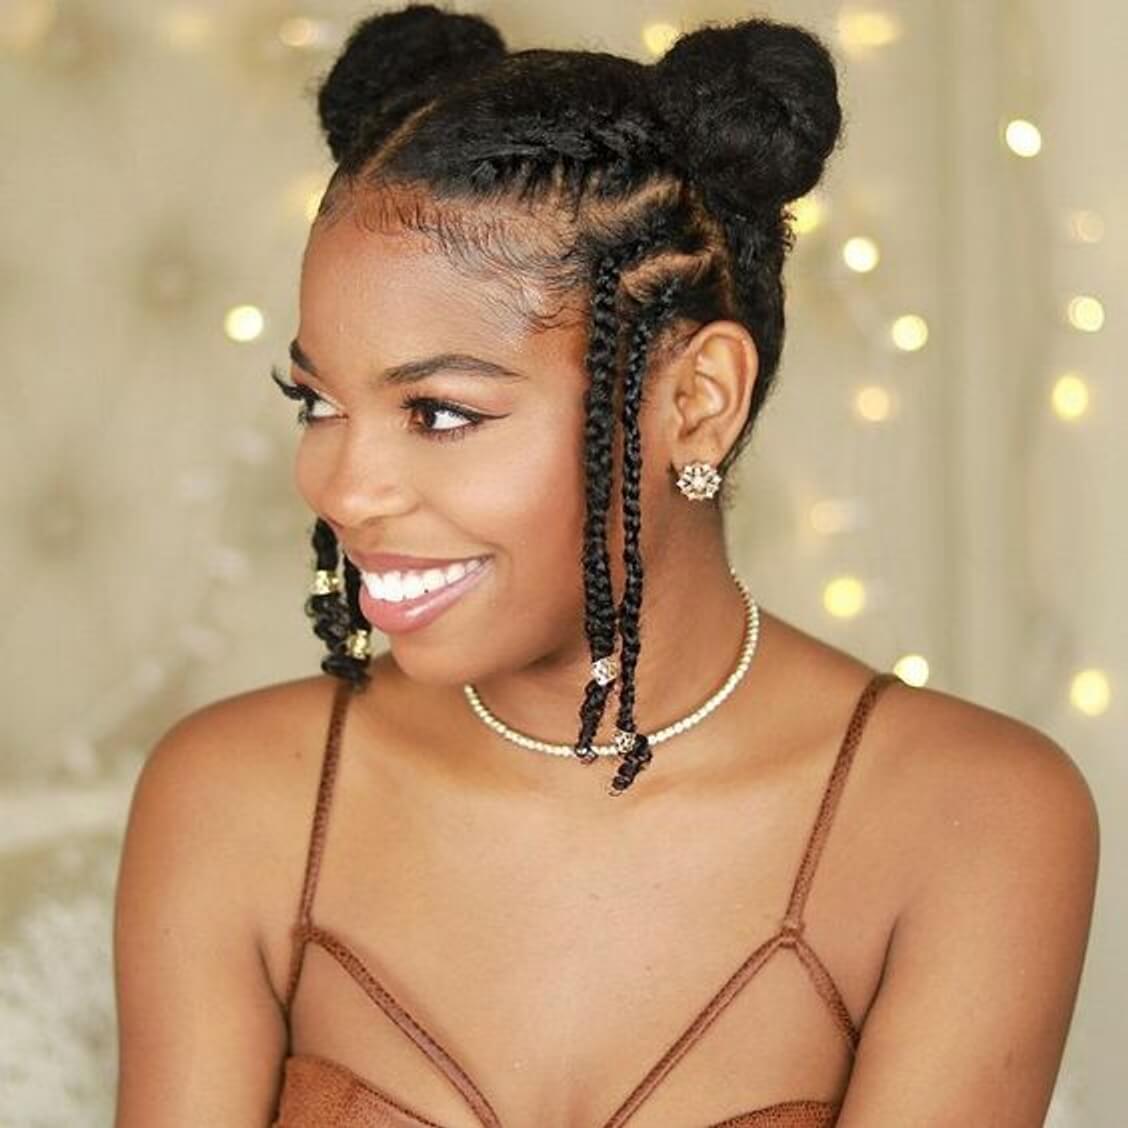 50 Trendy Braided Hairstyles To Instantly Glam Up Your Look - 321